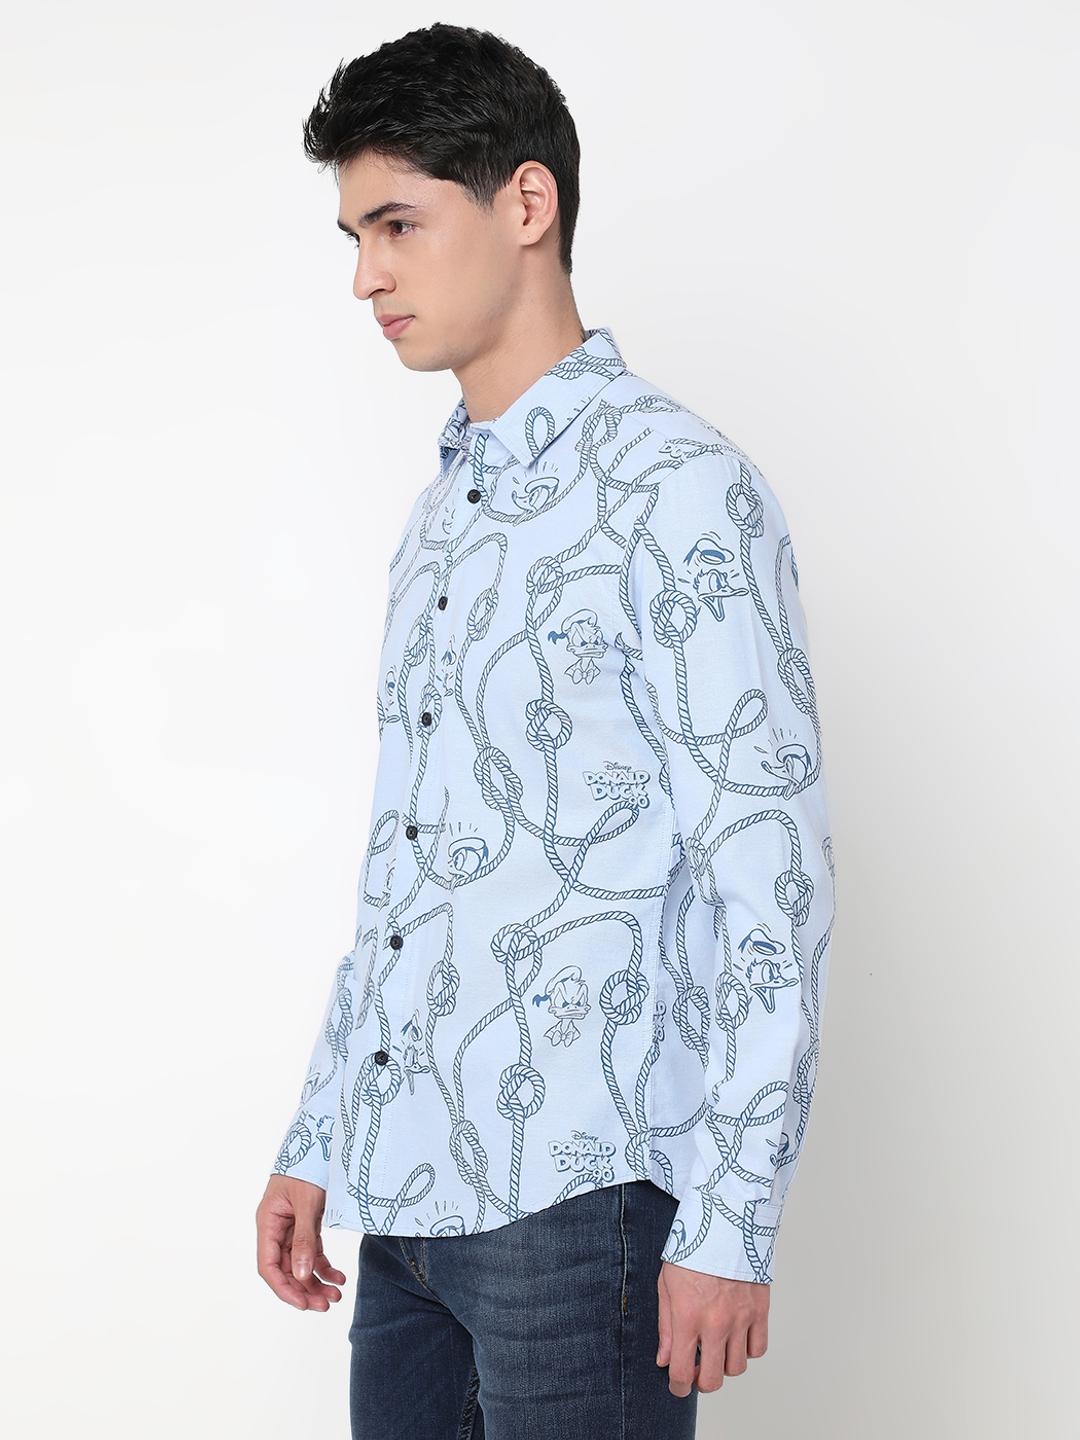 Donald Duck All Over Printed Full Sleeve Shirt with Classic Collar